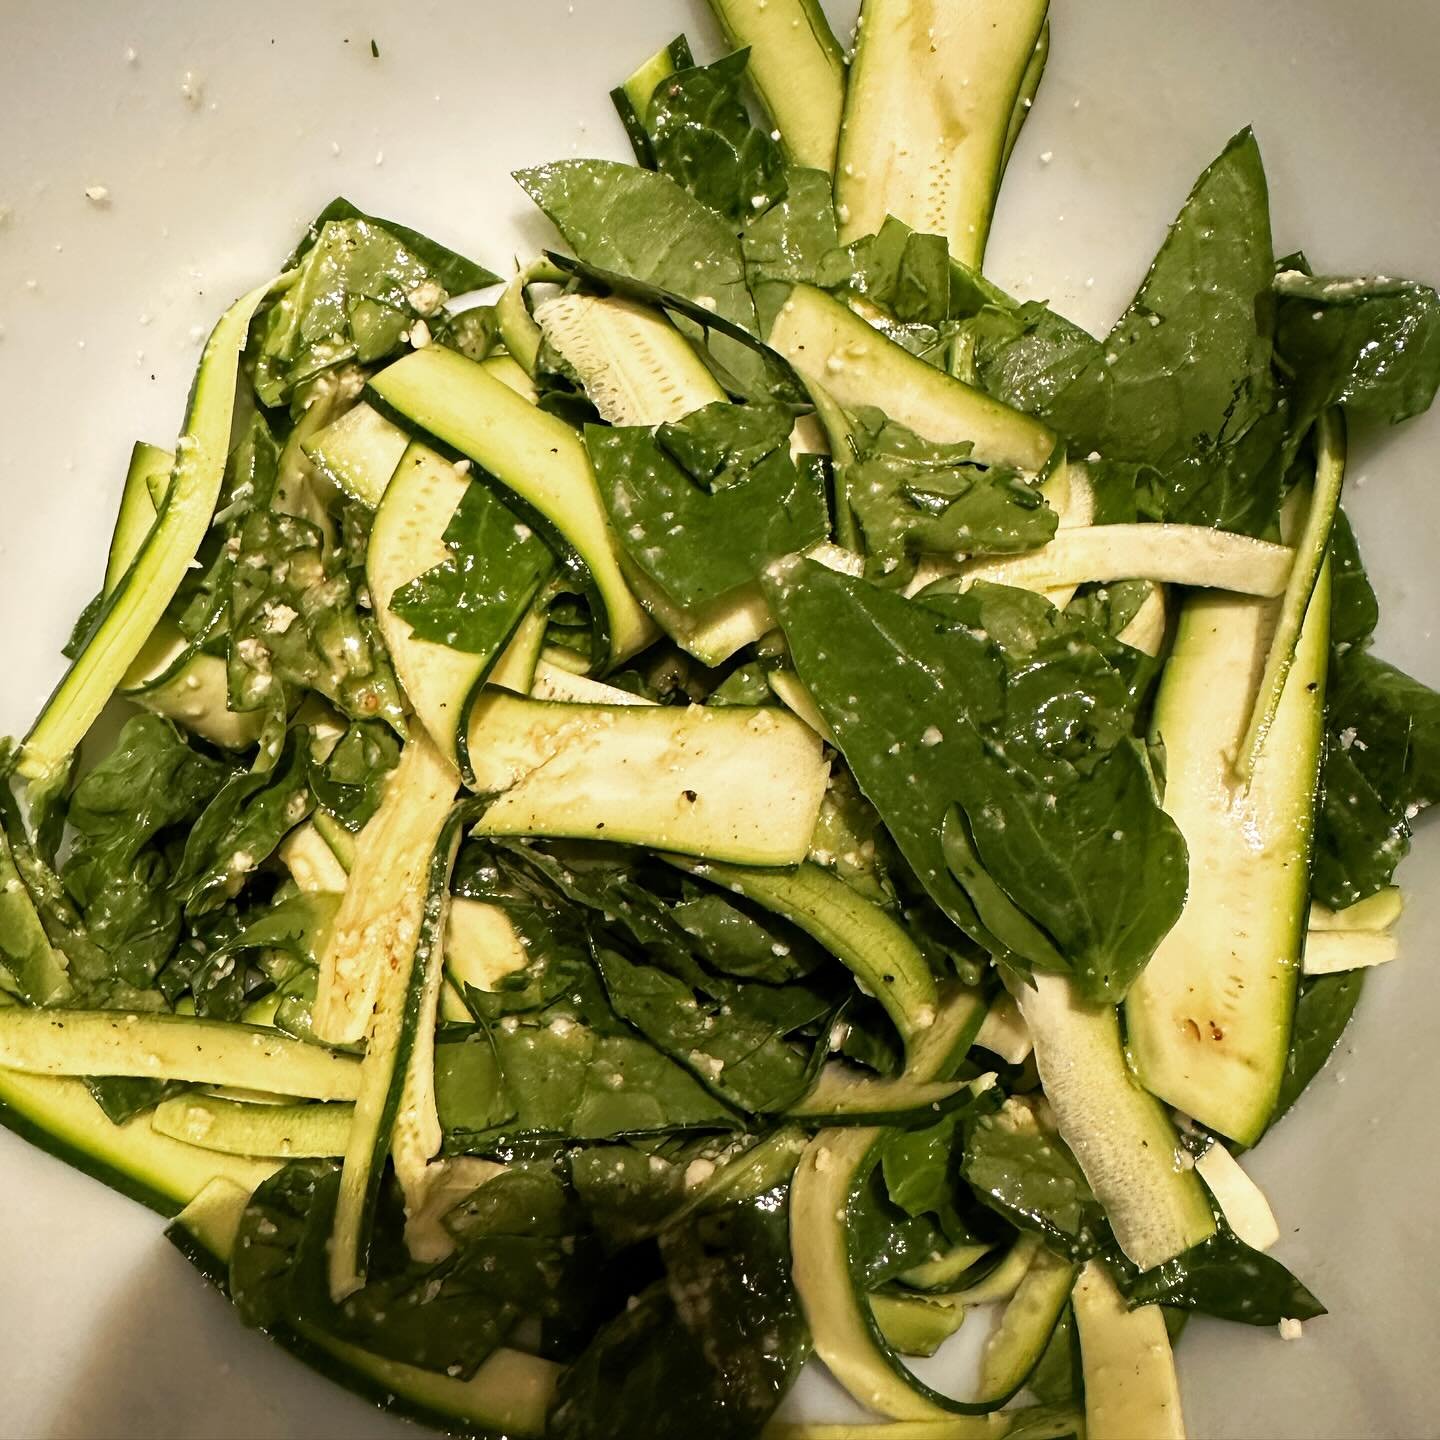 Gorgeous zucchini and spinach from Abundant Life Farm in Hotchkiss!  We ❤️ local food!  #northforkvalley #localfood #slowfood #supportsmallbusiness